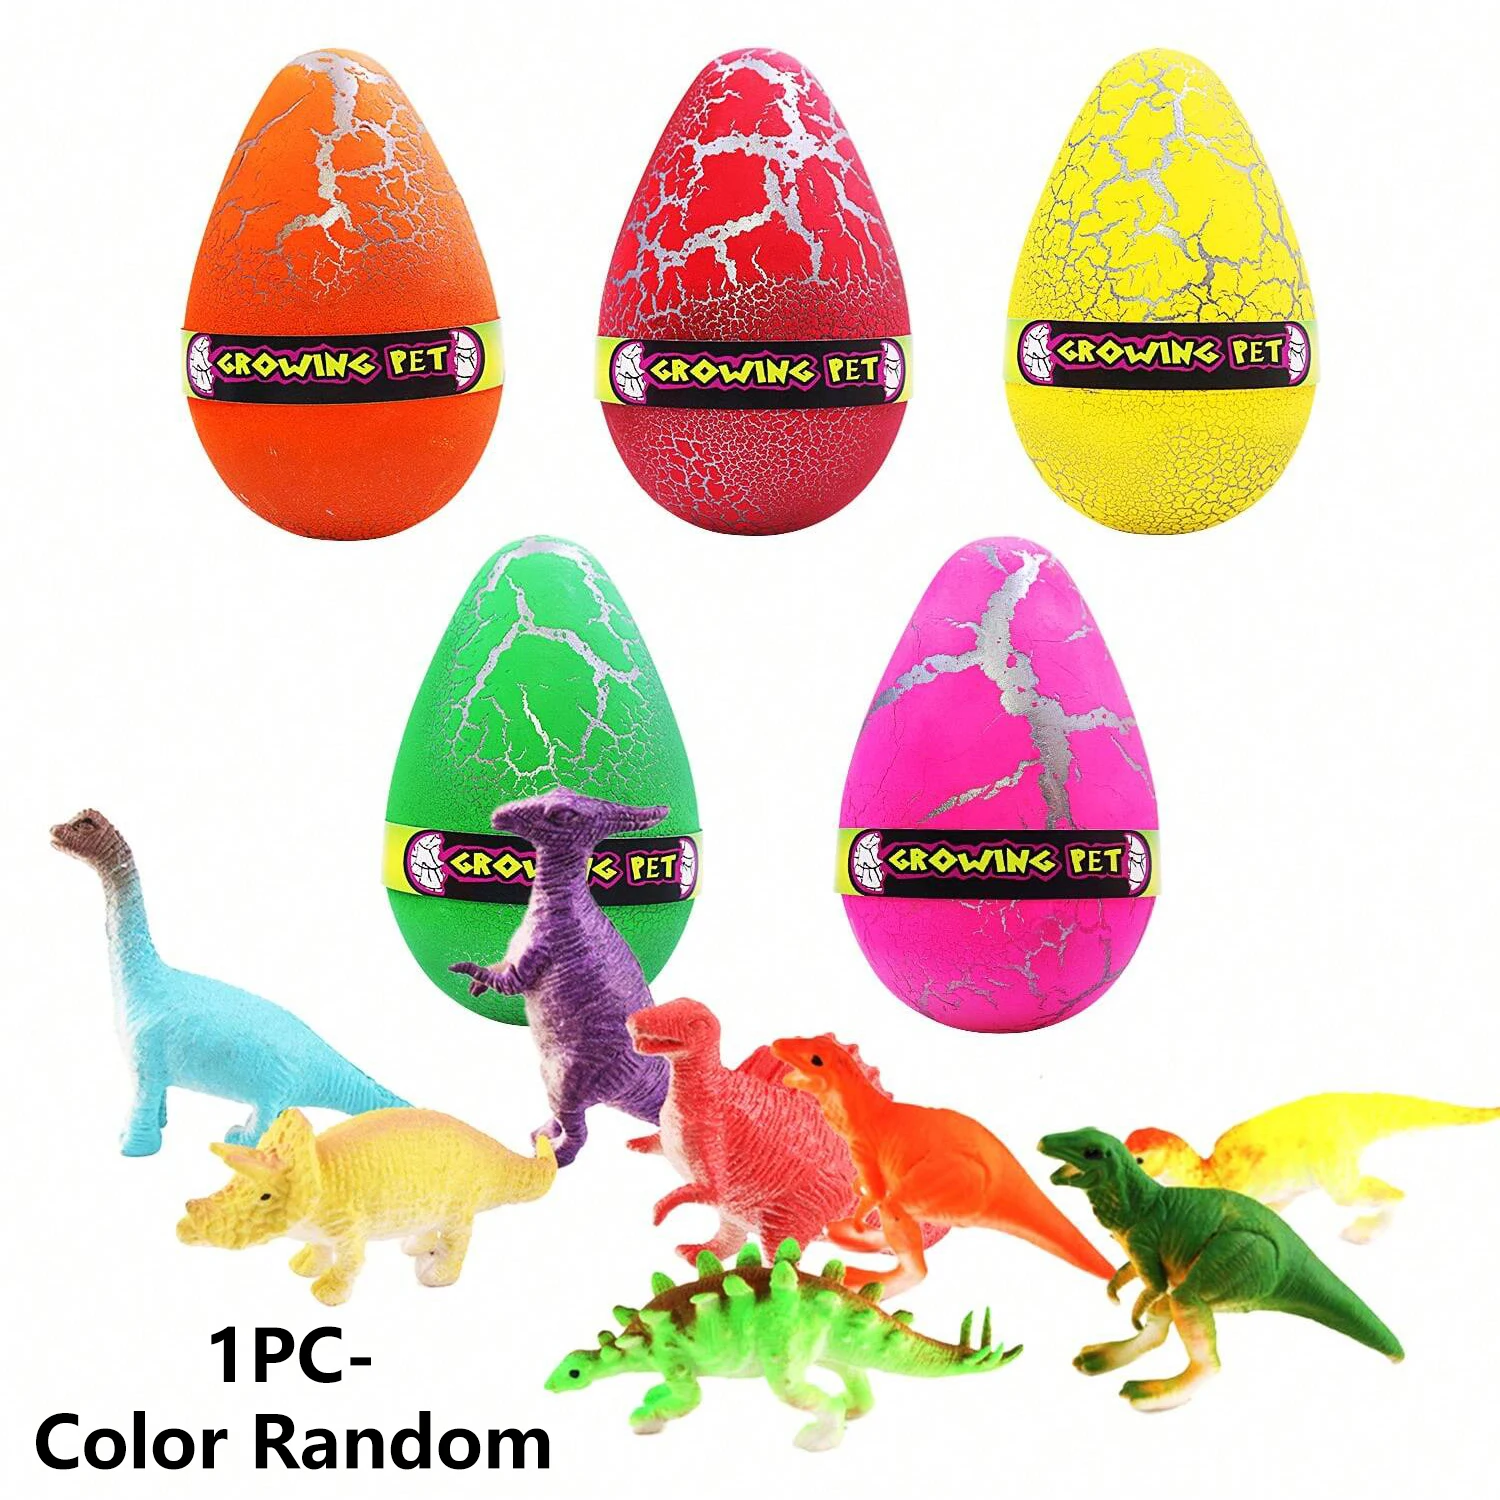 

Dinosaur Egg, Hatch & Grow In Water Dino Egg, Magic Toy, Hatch Egg Crack Science Kits Novelty Toy Easter Gifts (Color Random)